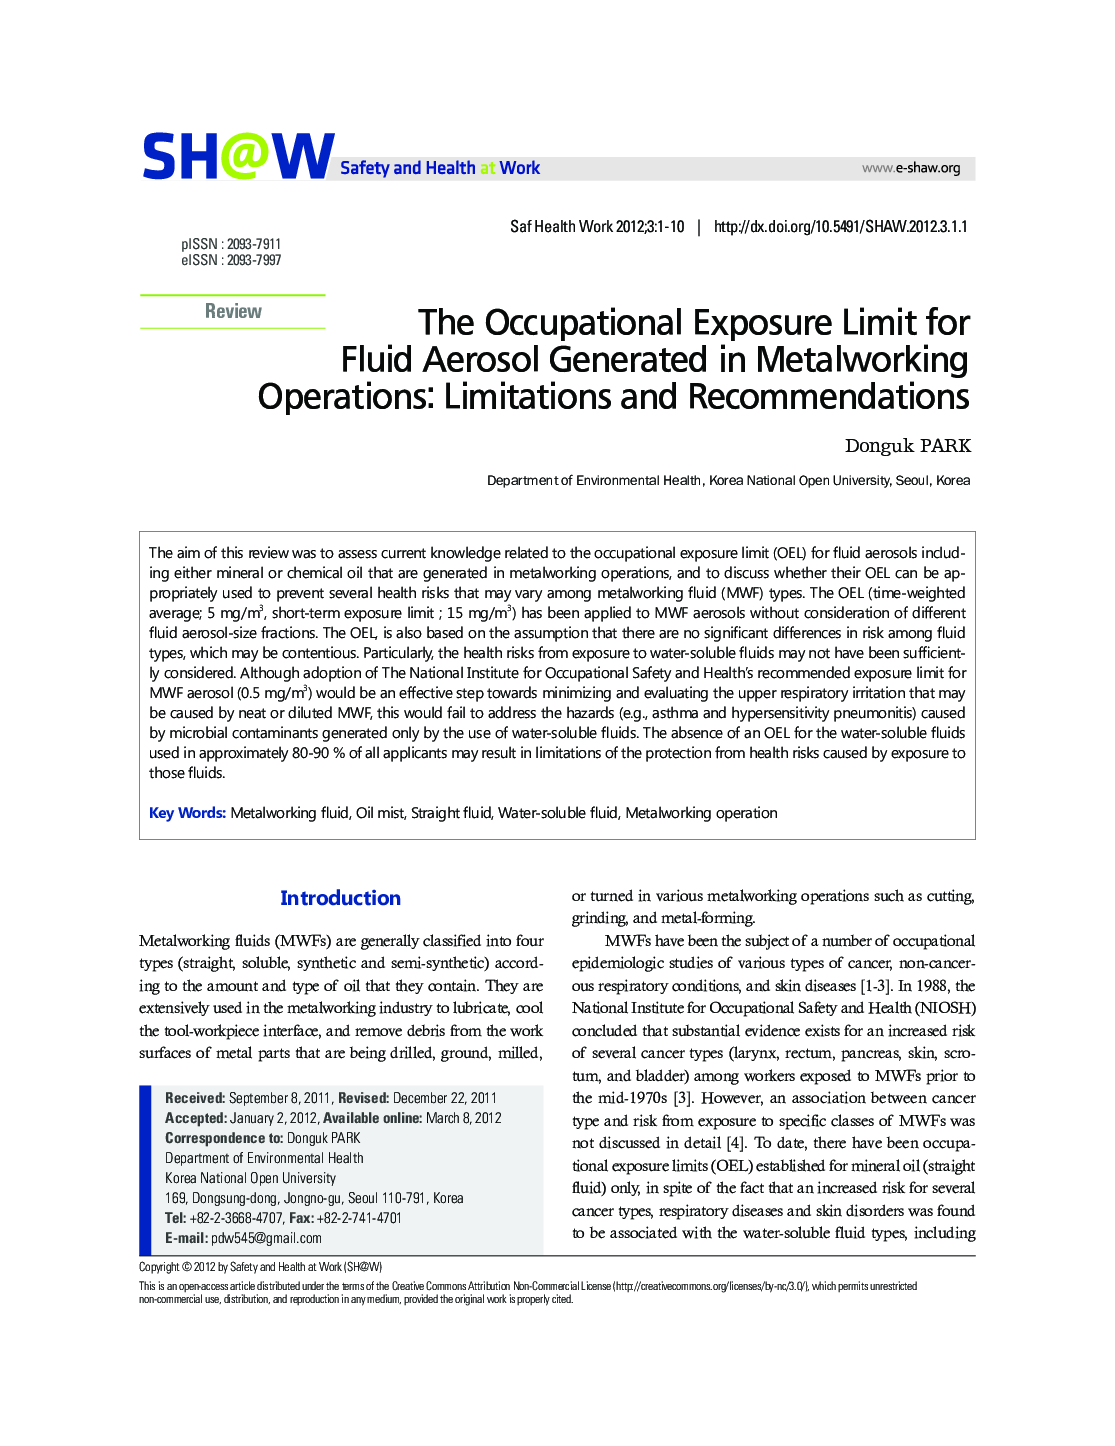 The Occupational Exposure Limit for Fluid Aerosol Generated in Metalworking Operations: Limitations and Recommendations